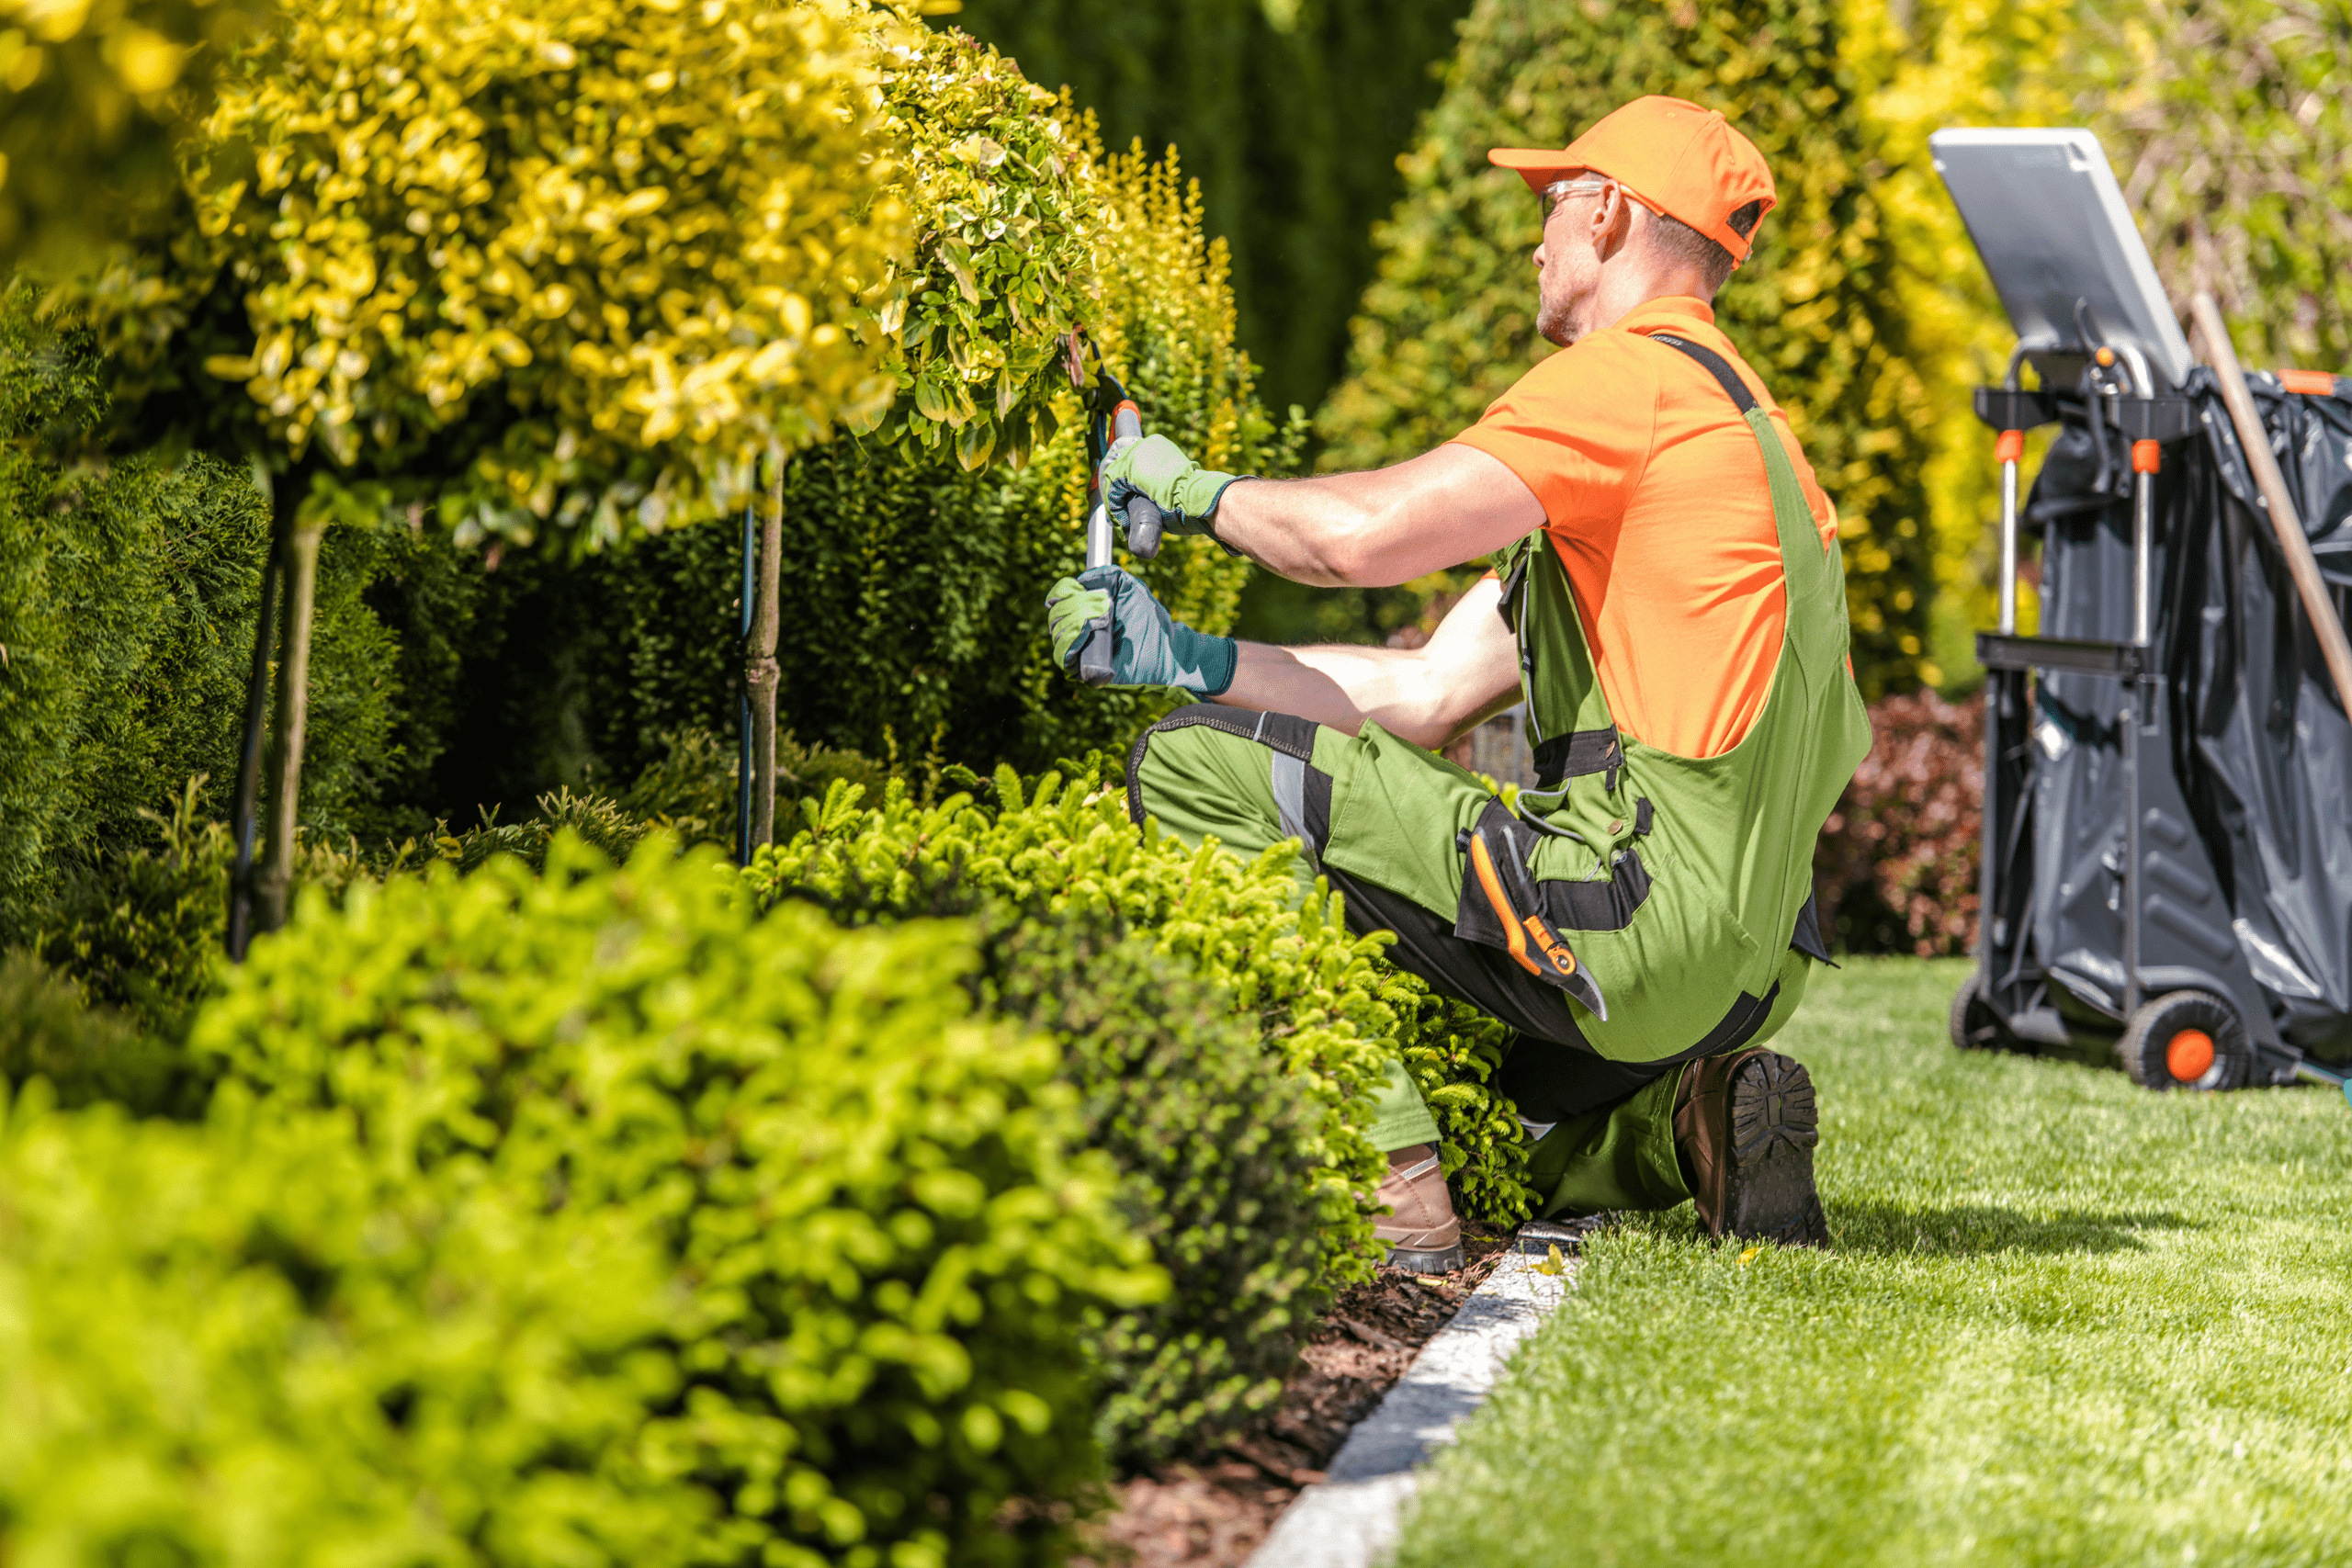 Image of a landscaper to introduce our blog titled 'Marketing for Landscapers'